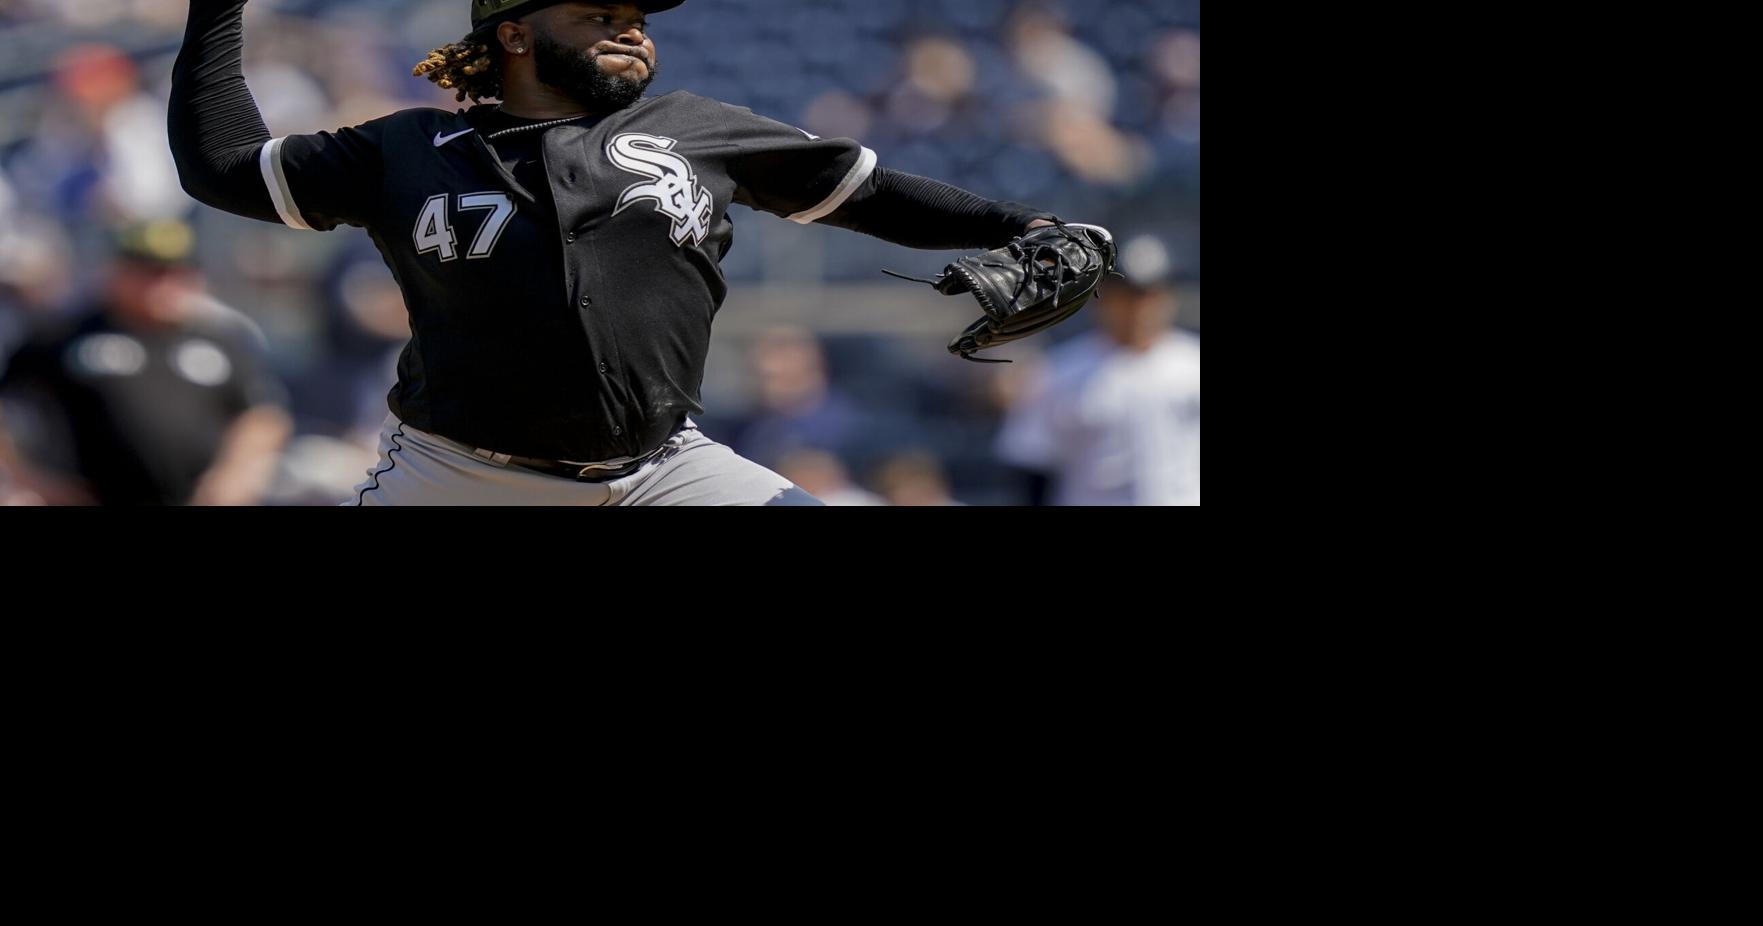 Six more scoreless innings for Johnny Cueto and a White Sox